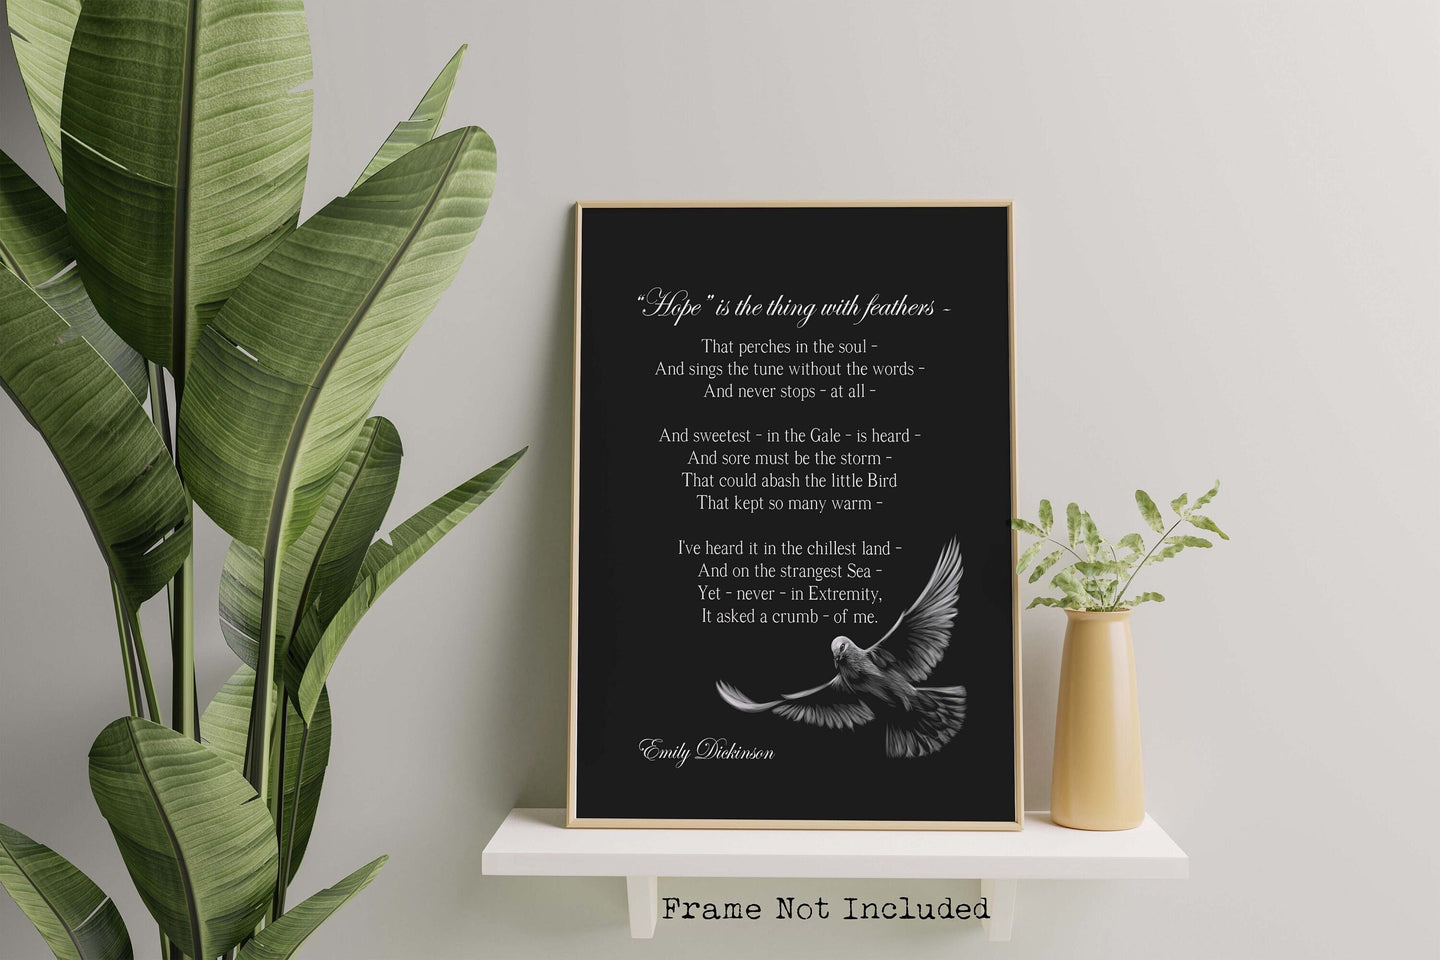 Hope is the thing with feathers - Emily Dickinson - Poetry Wall art - Unframed print